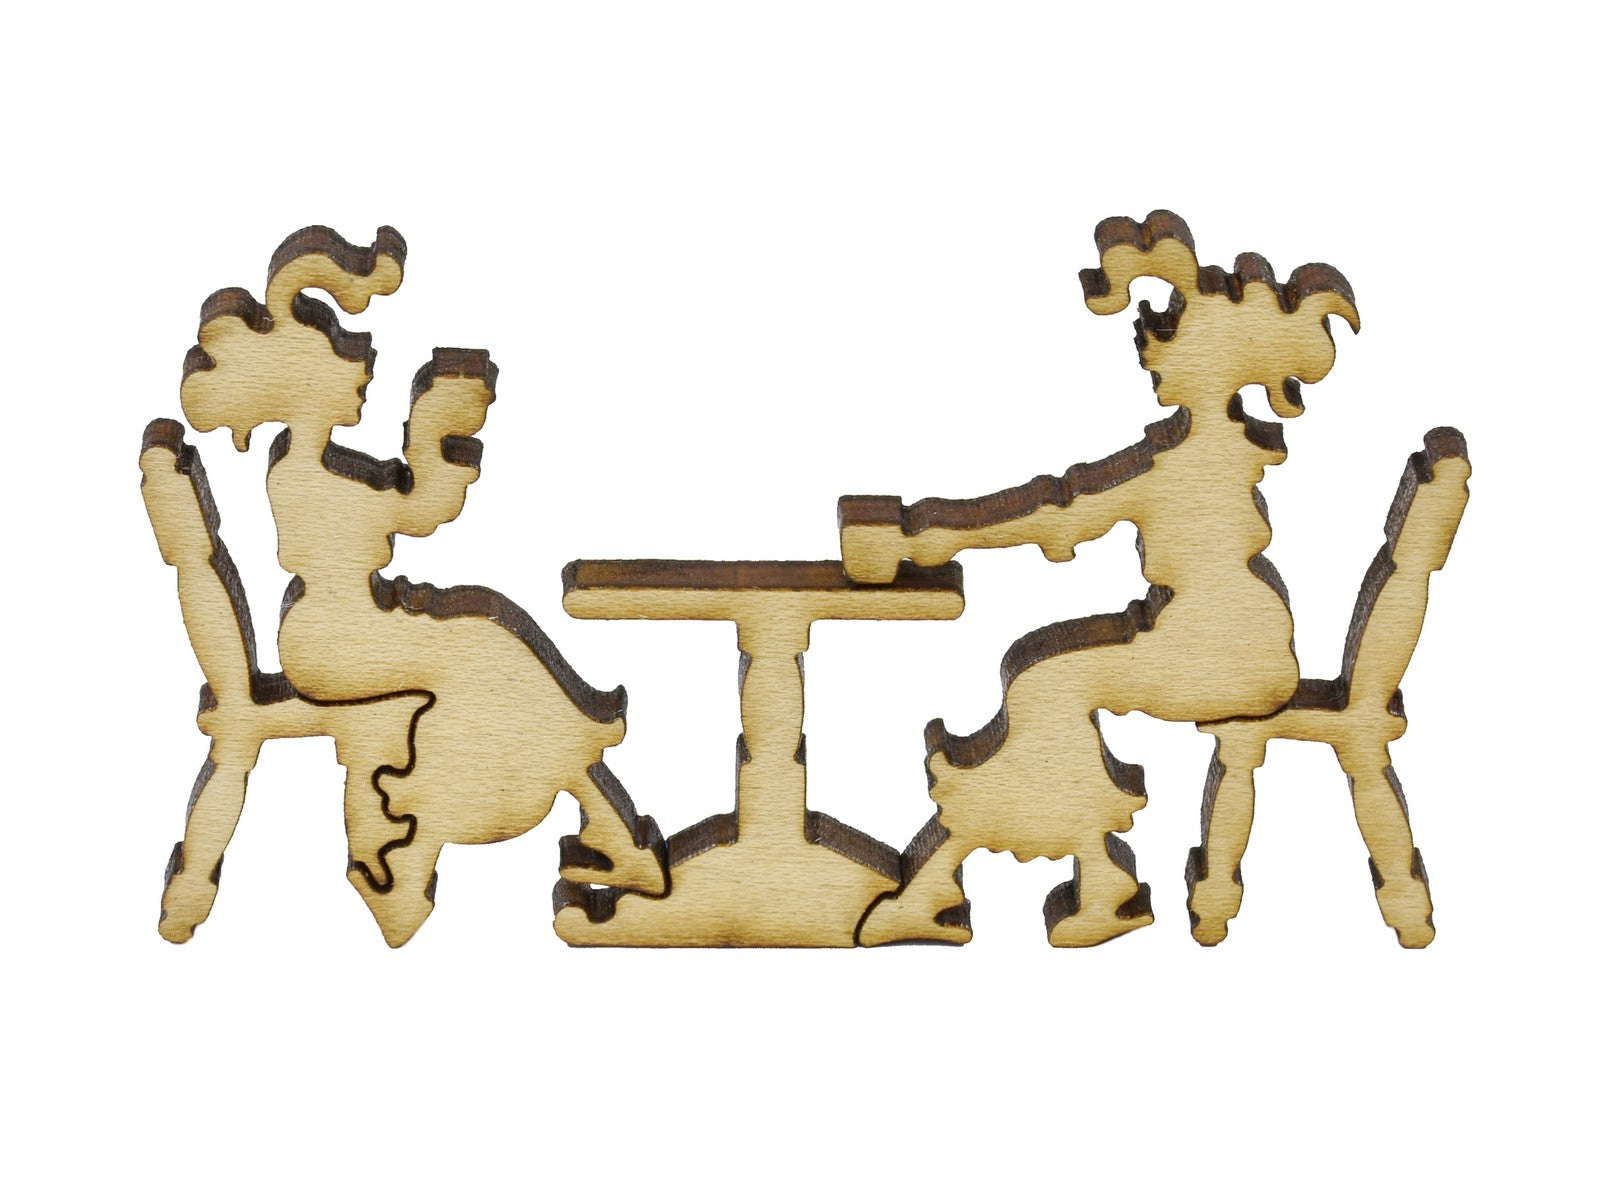 A closeup of pieces in the shape of two people sitting at a table.